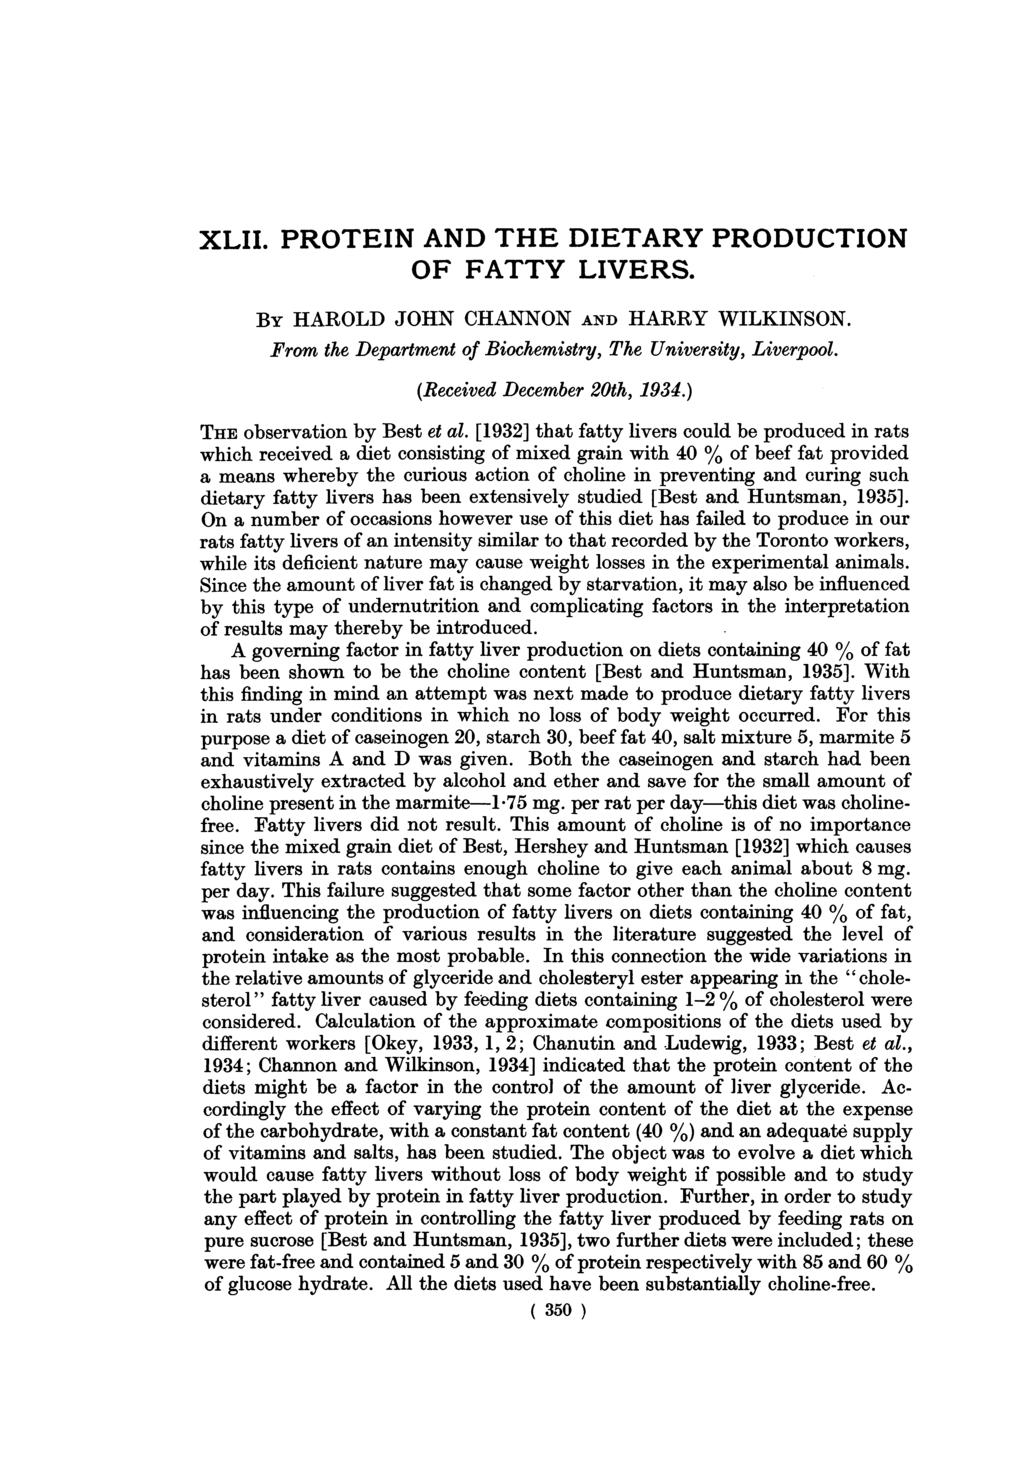 XLII. PROTEIN AND THE DIETARY PRODUCTION OF FATTY LIVERS. BY HAROLD JOHN CHANNON AND HARRY WILKINSON. From the Department of Biochemistry, The University, Liverpool. (Received December 20th, 1934.